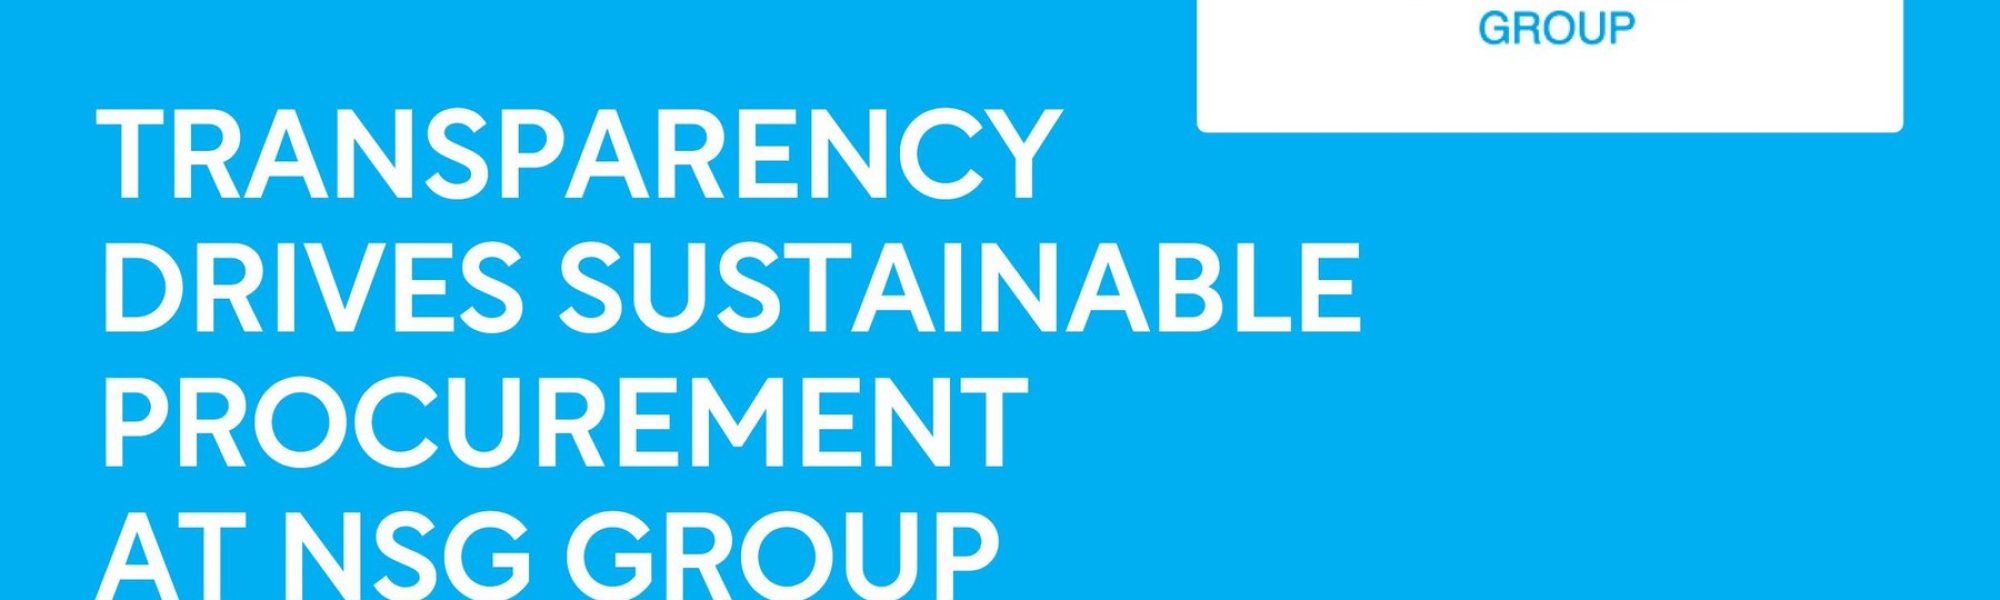 Transparency drives sustainable procurement at NSG Group